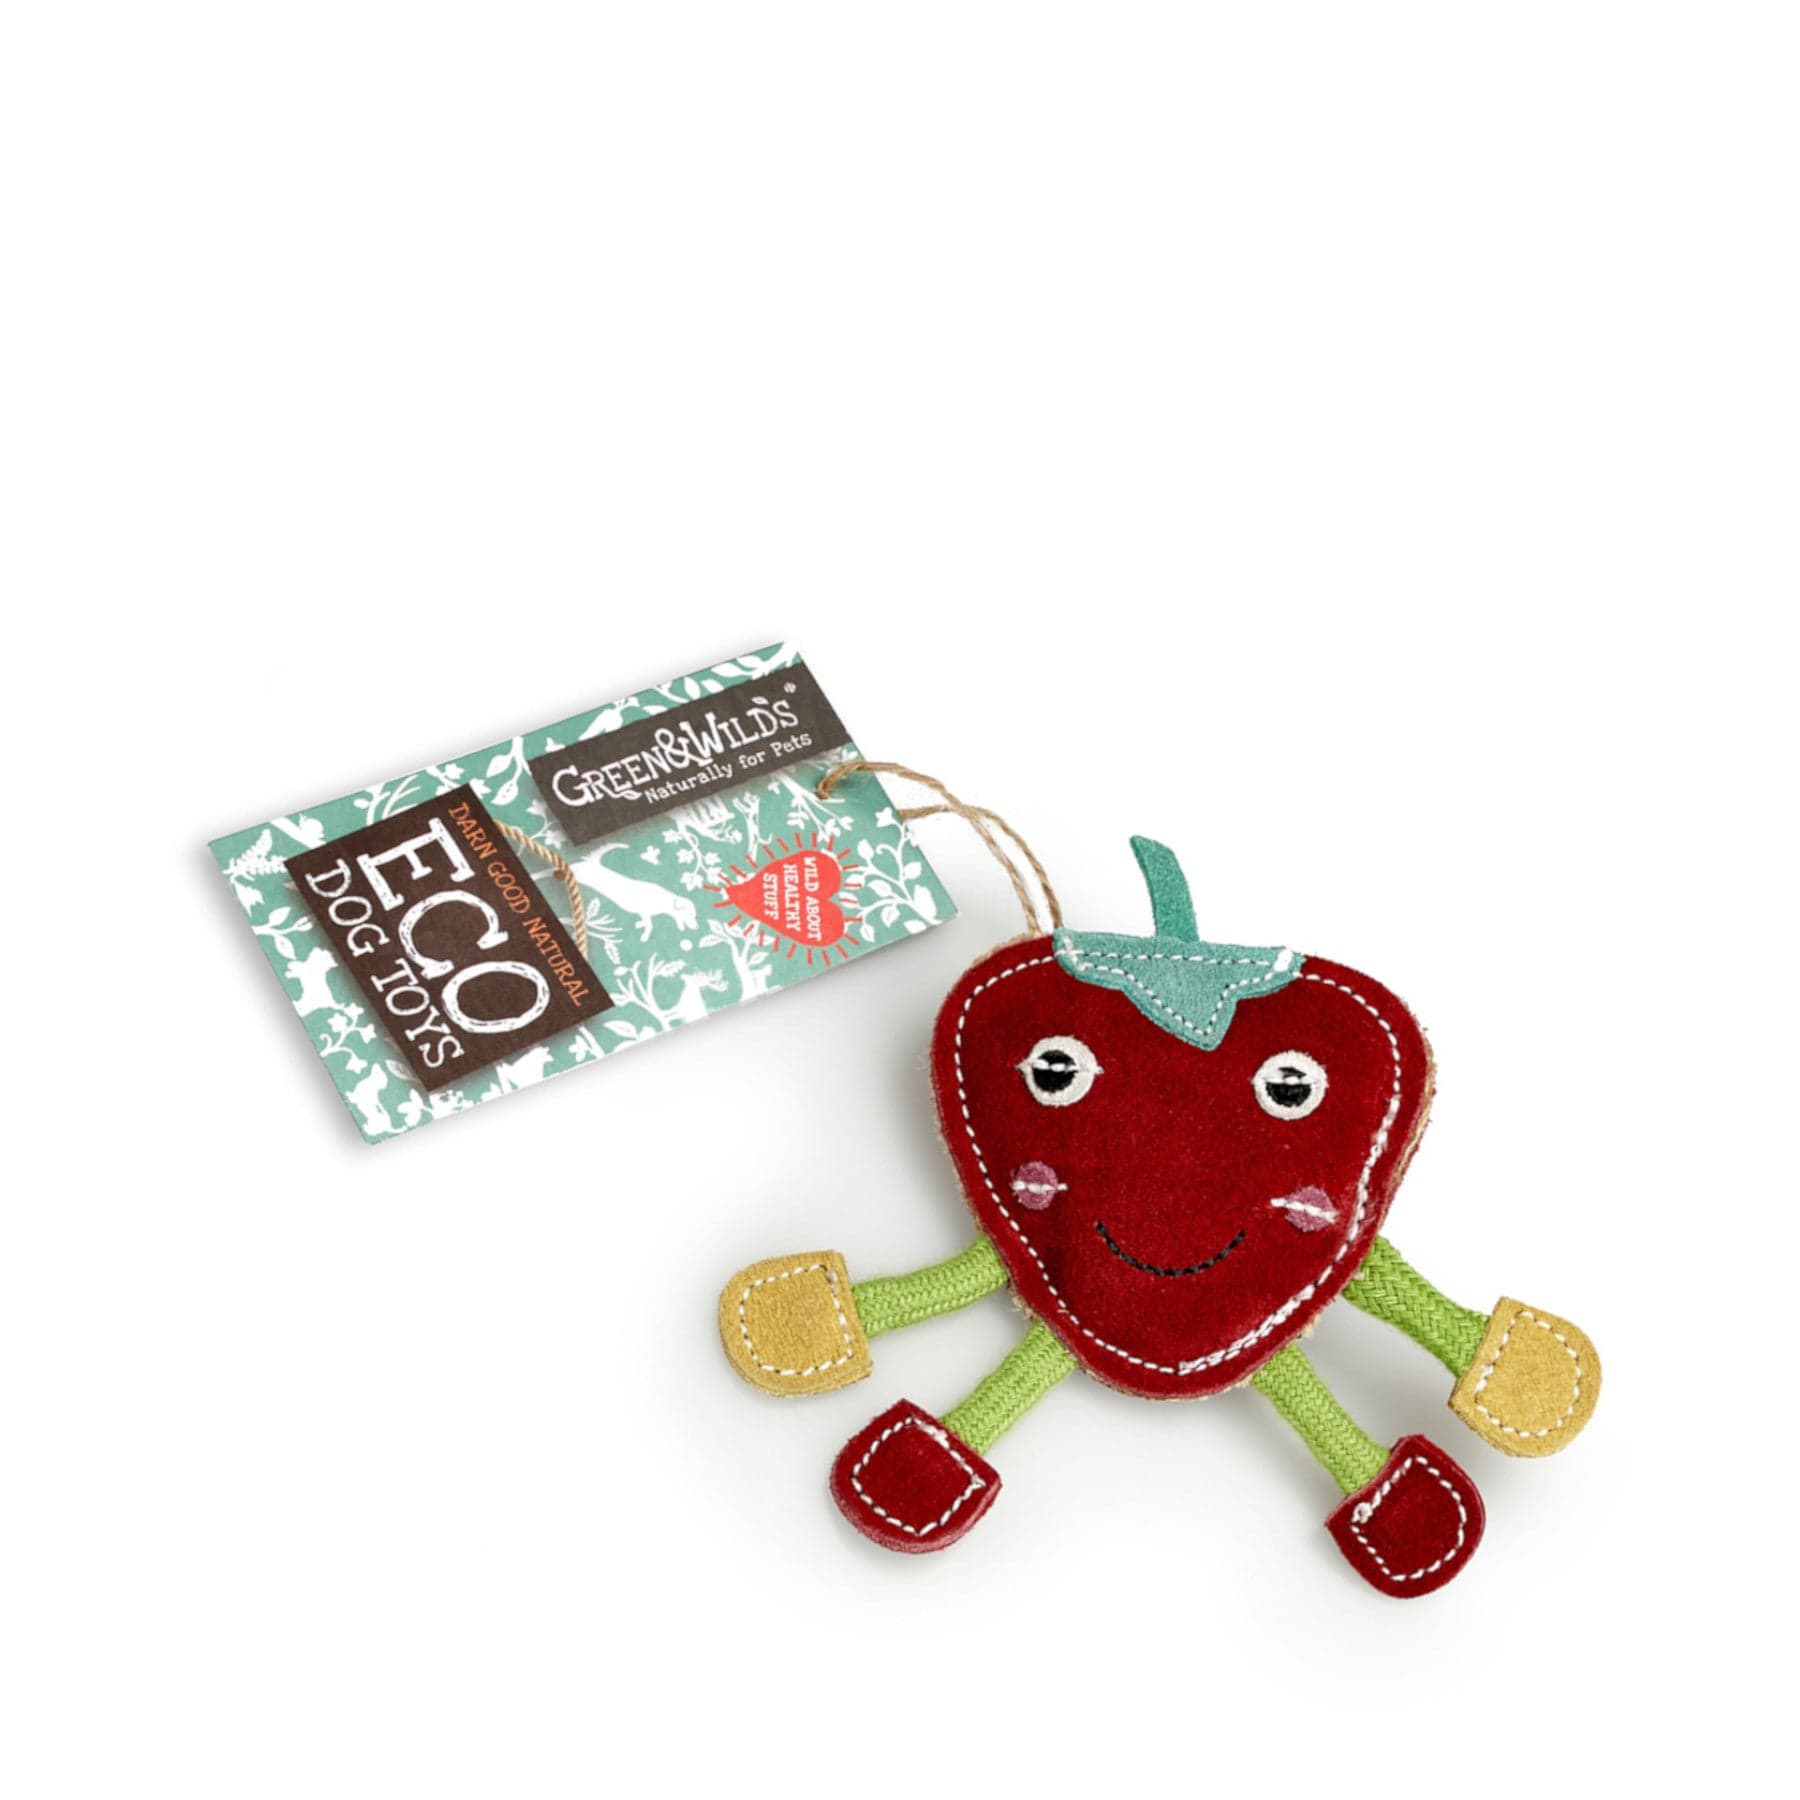 Steve the strawberry eco pet toy